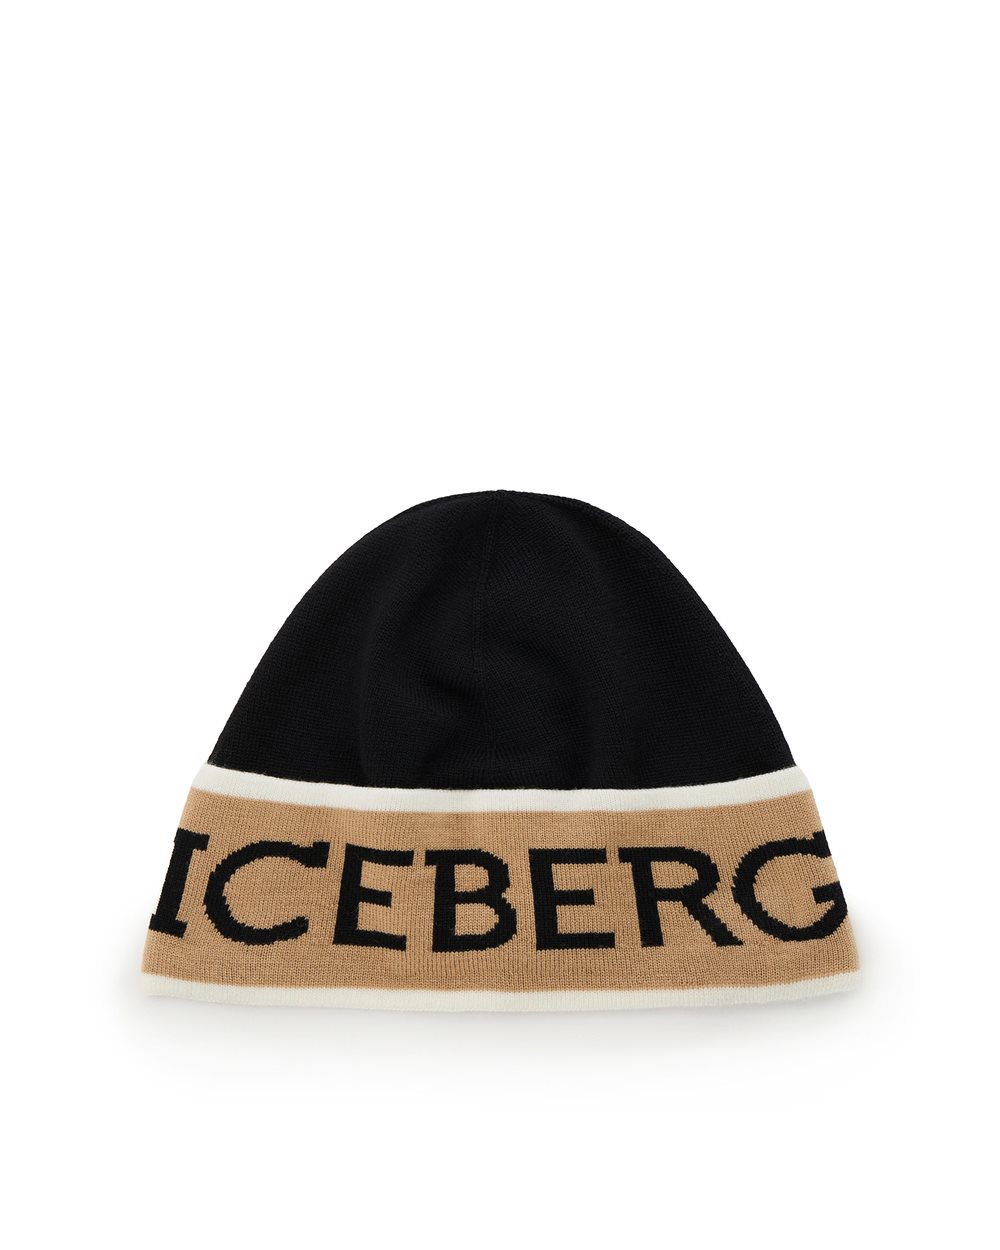 Black wool beanie with logo - ( SECONDO STEP IT ) PROMO SALDI UP TO 50% | Iceberg - Official Website